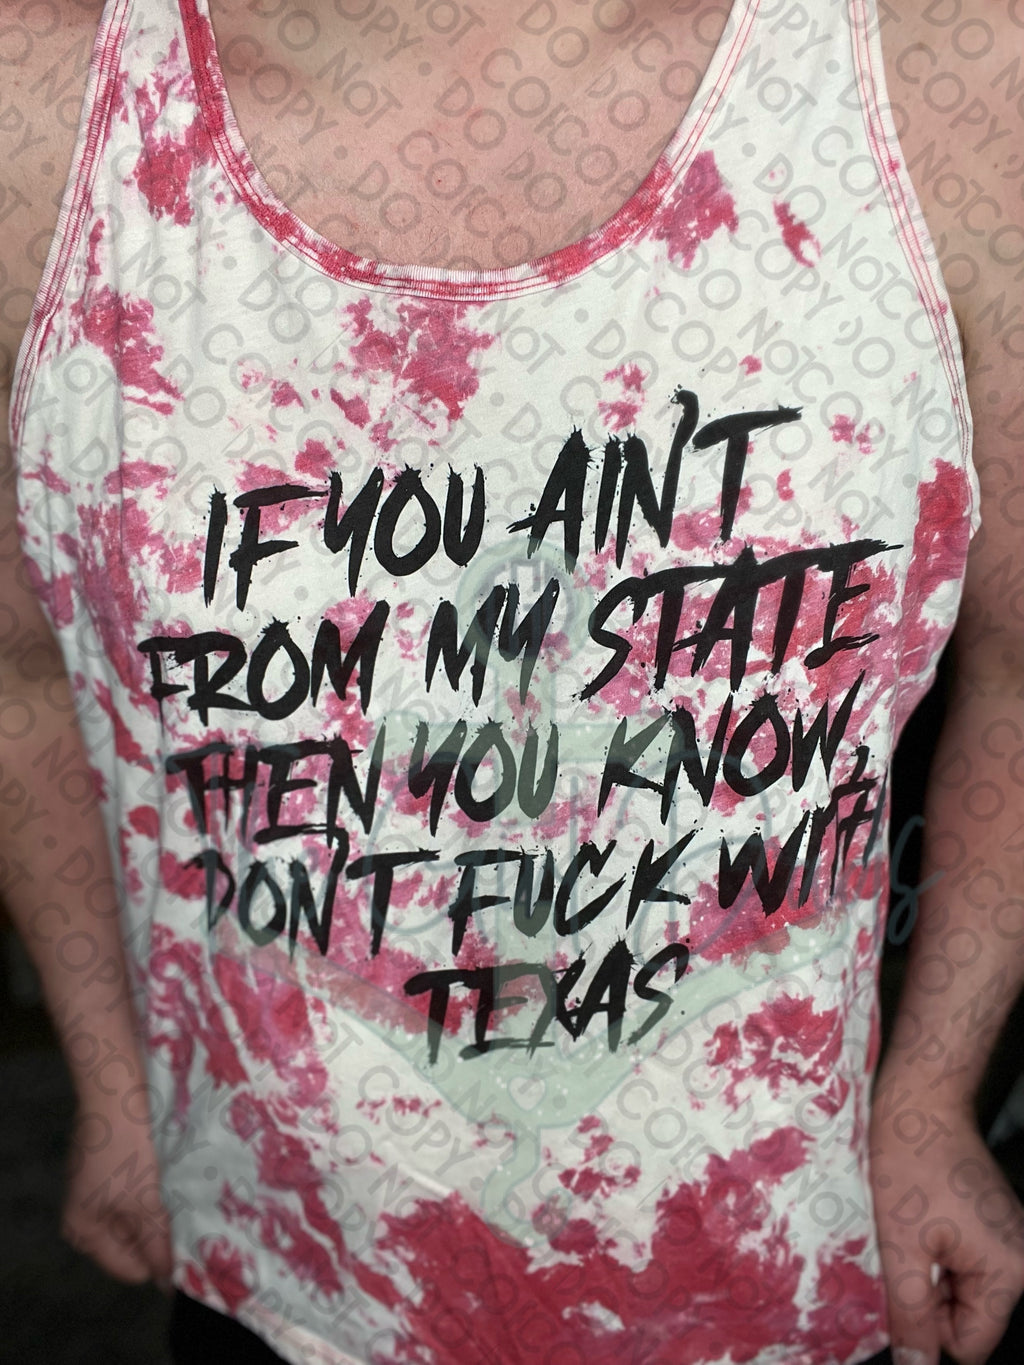 Don't Fuck With Texas (Front & Back) Top Design